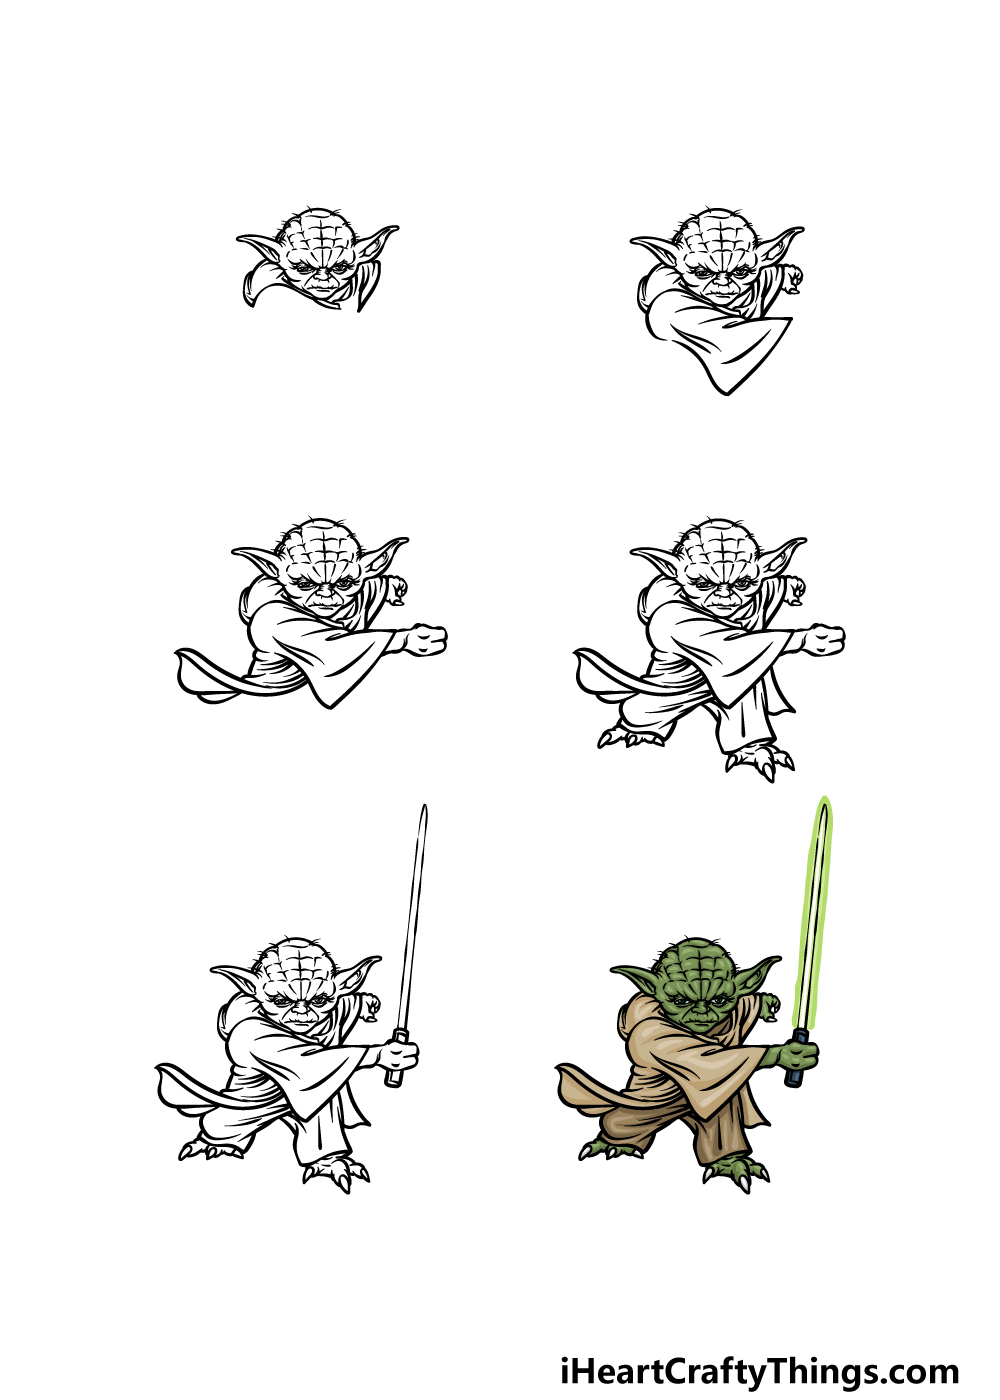 how to draw Yoda in 6 steps